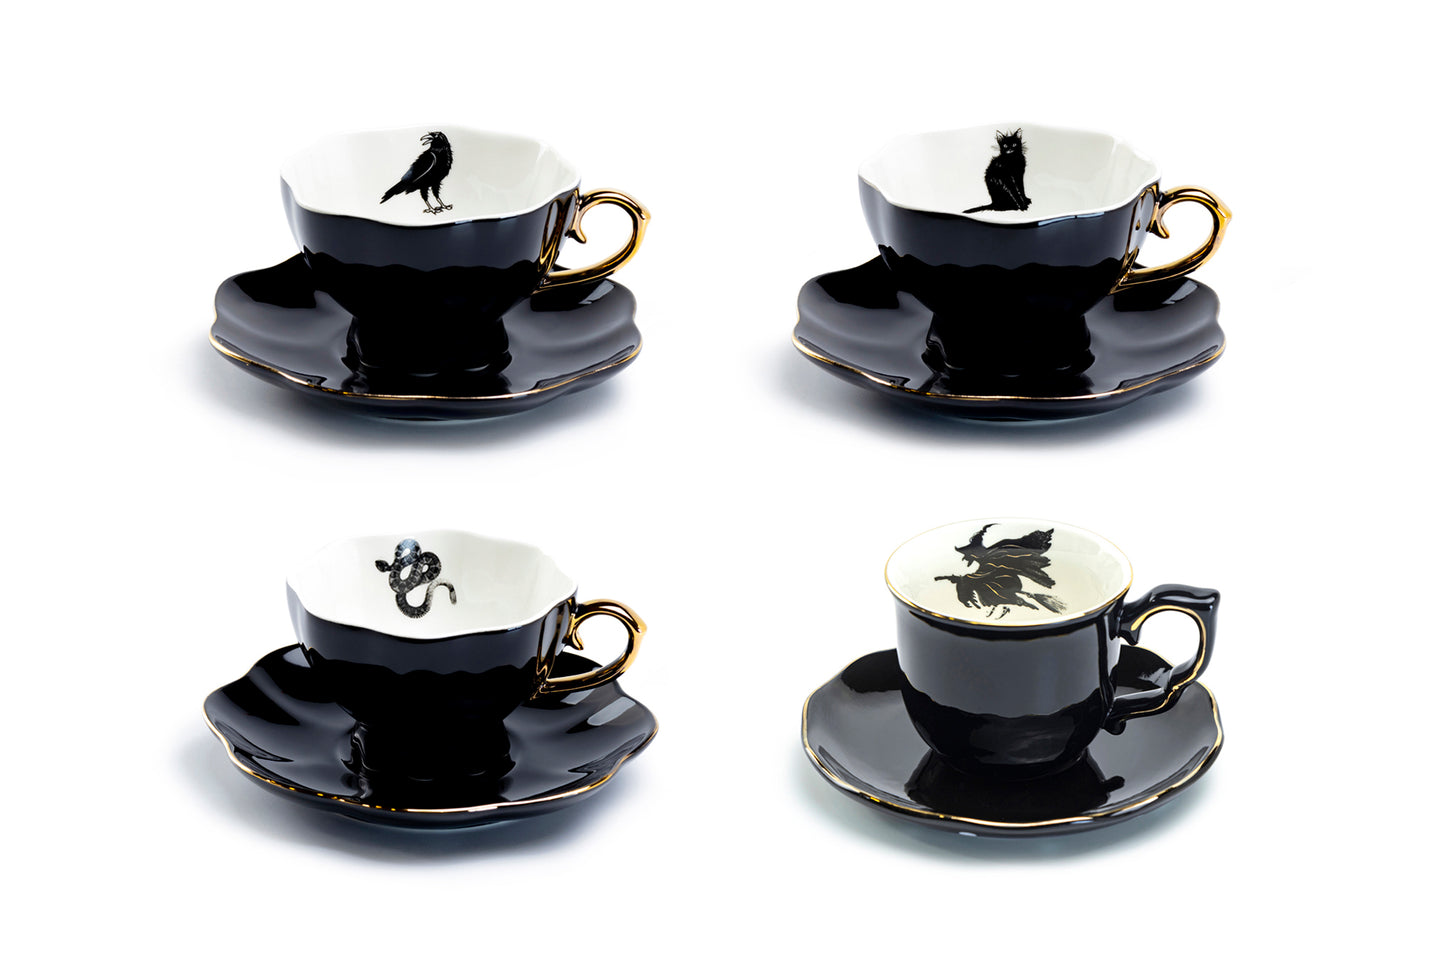 Black Gold Scallop Teapot + 4 Assorted Halloween Tea Cup and Saucer Sets - Ver. A